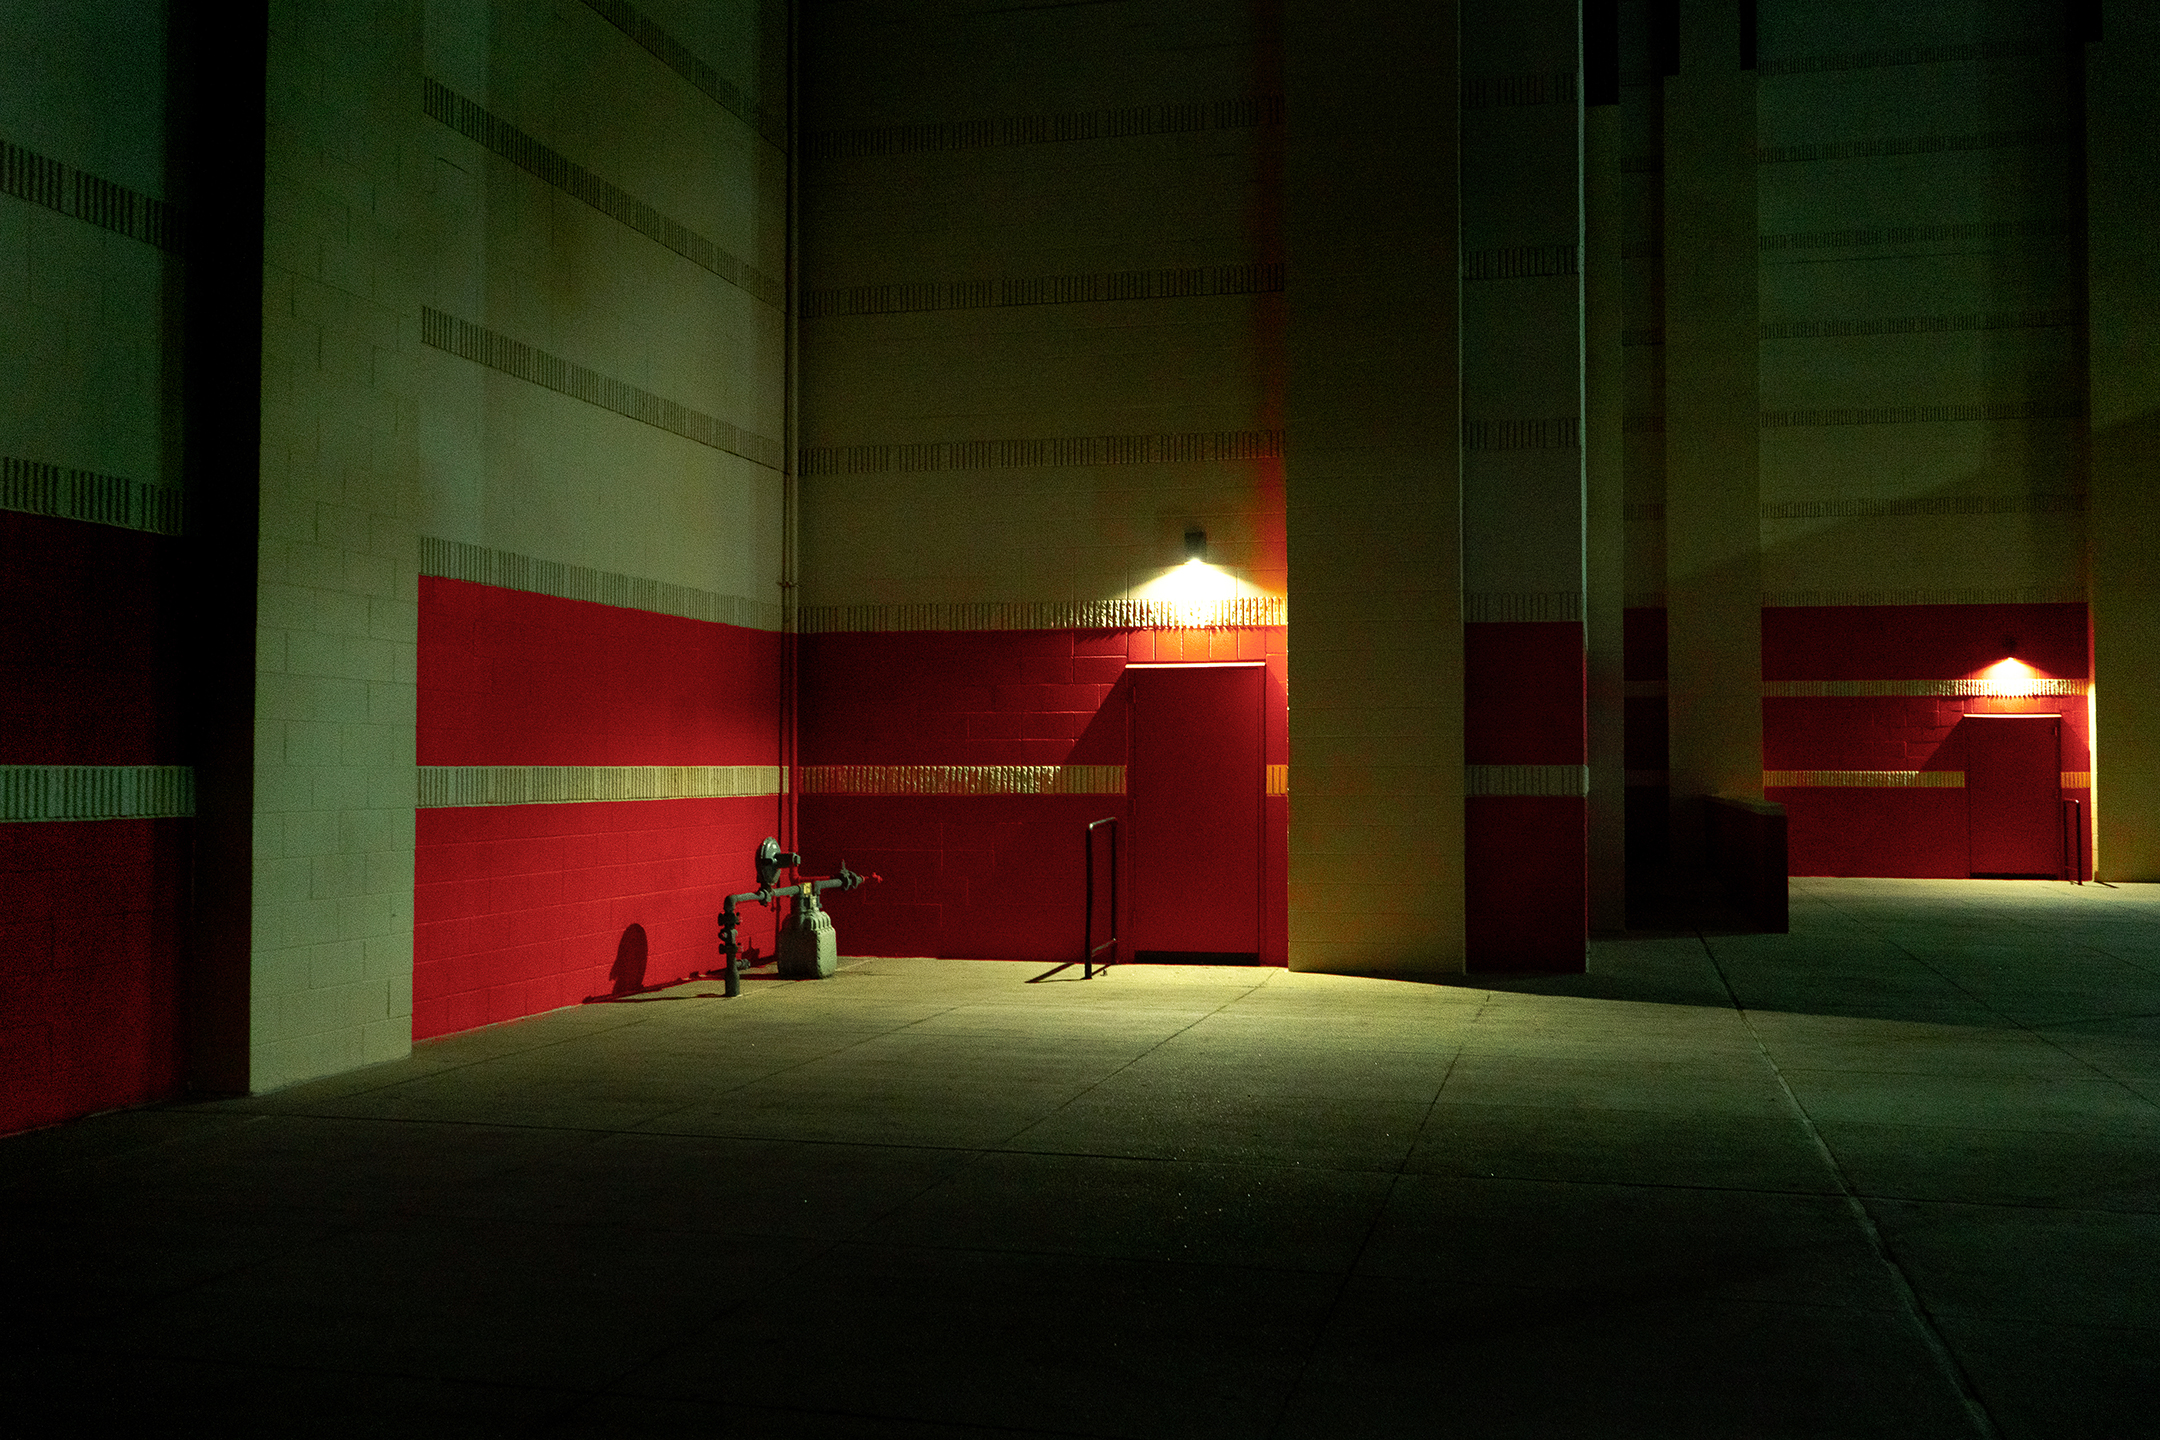 Photo of a building at night highlight a band of red paint and a gas meter under fluorescent light